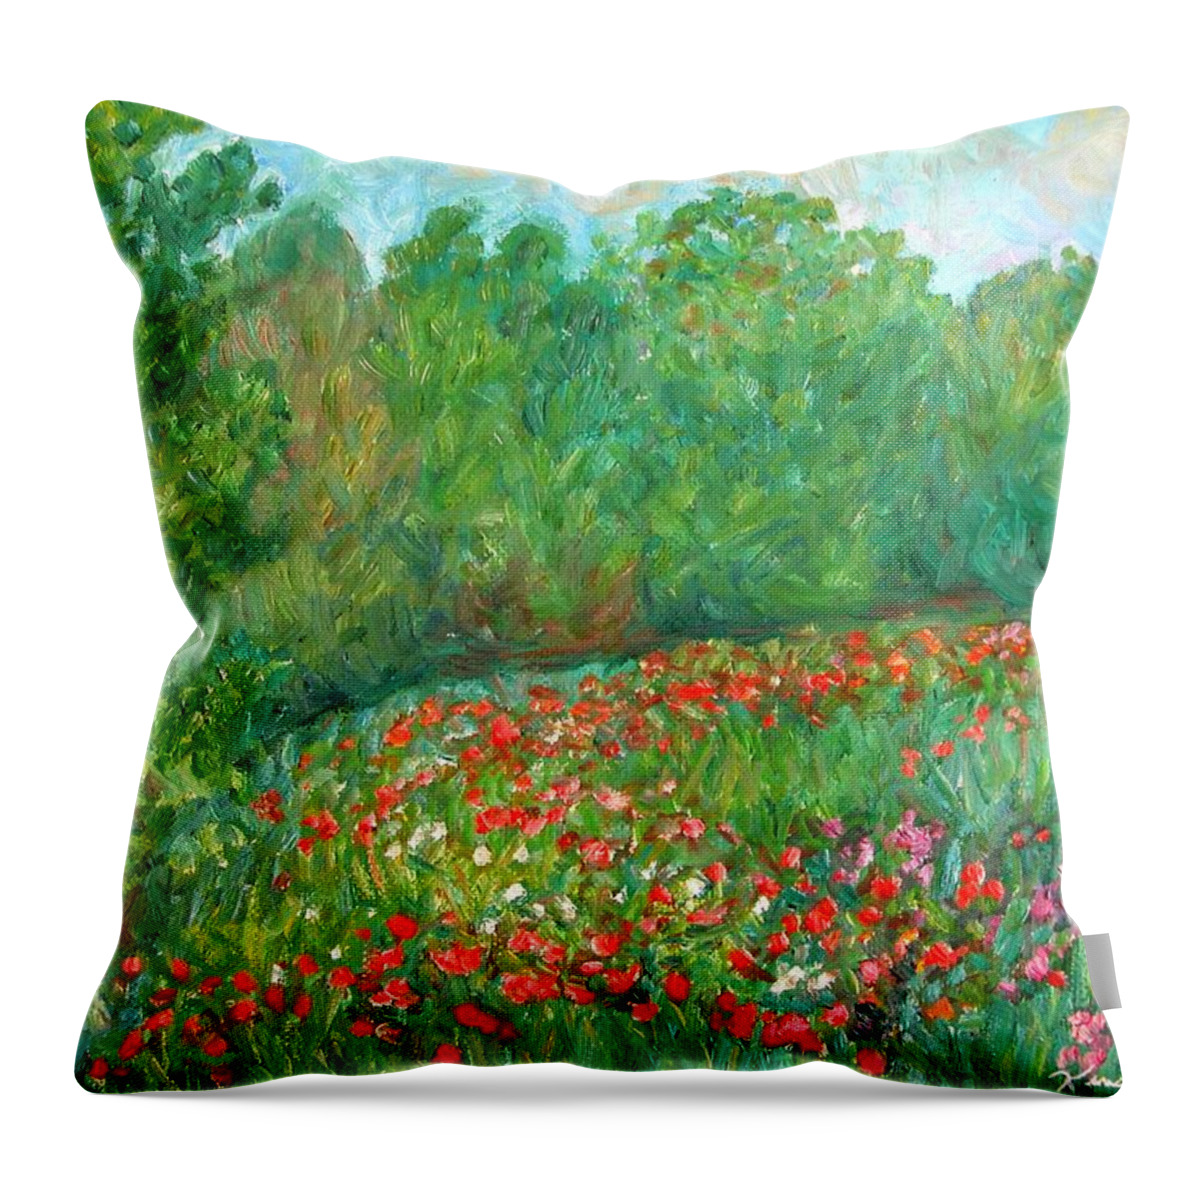 Blue Ridge Paintings Throw Pillow featuring the painting Flower Field by Kendall Kessler